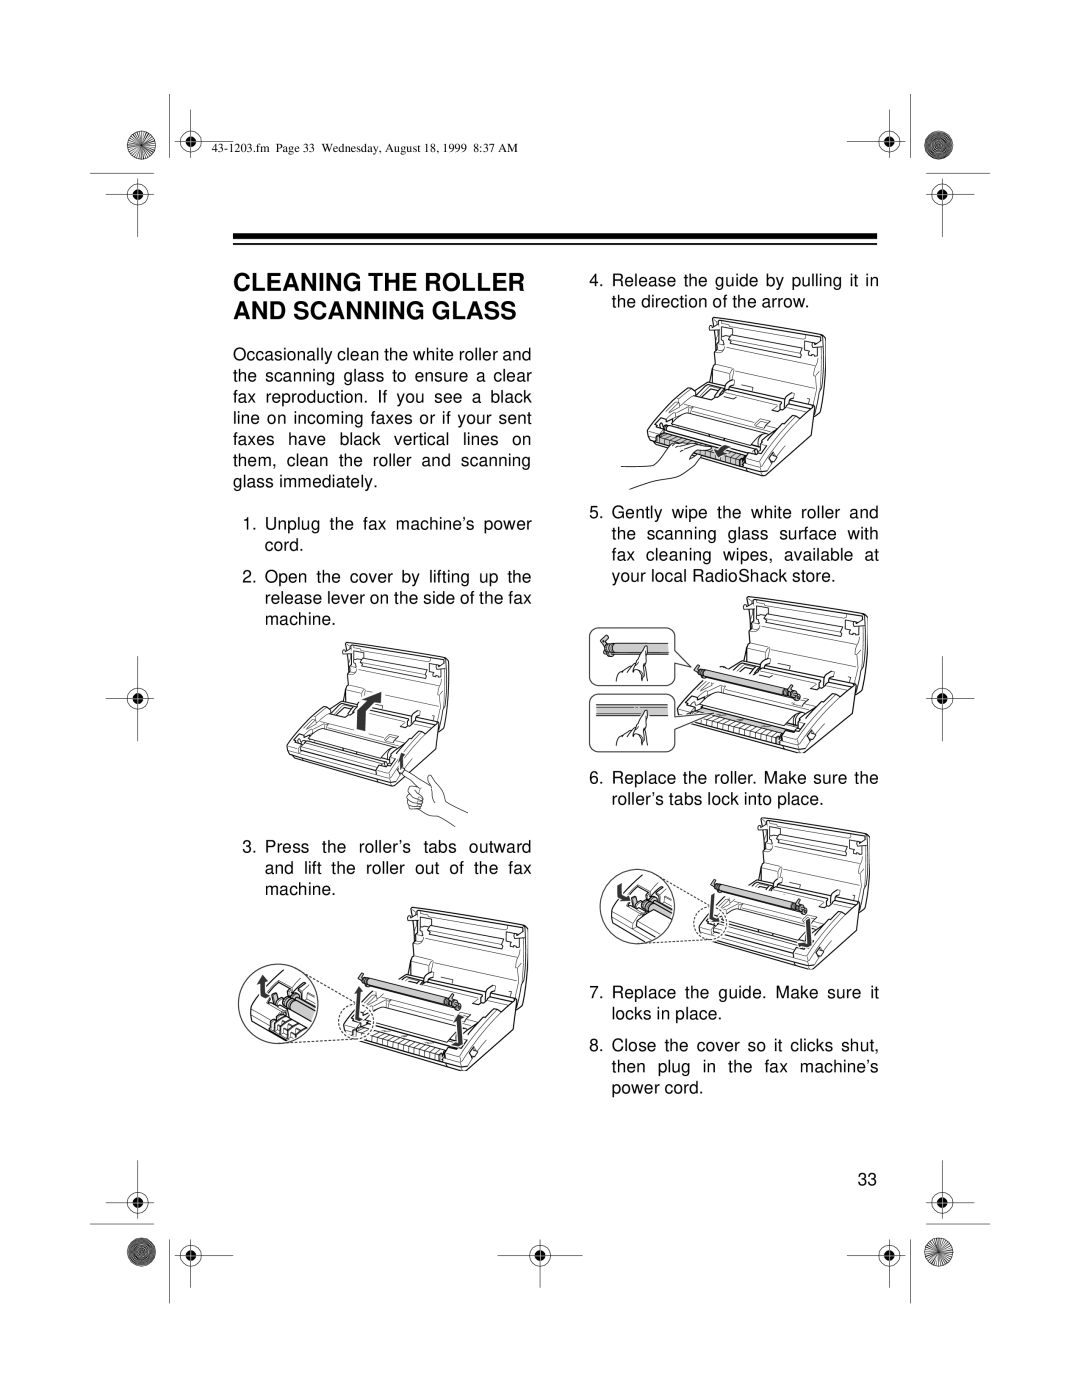 Radio Shack TFX-1031 owner manual Cleaning The Roller And Scanning Glass, fm Page 33 Wednesday, August 18, 1999 837 AM 